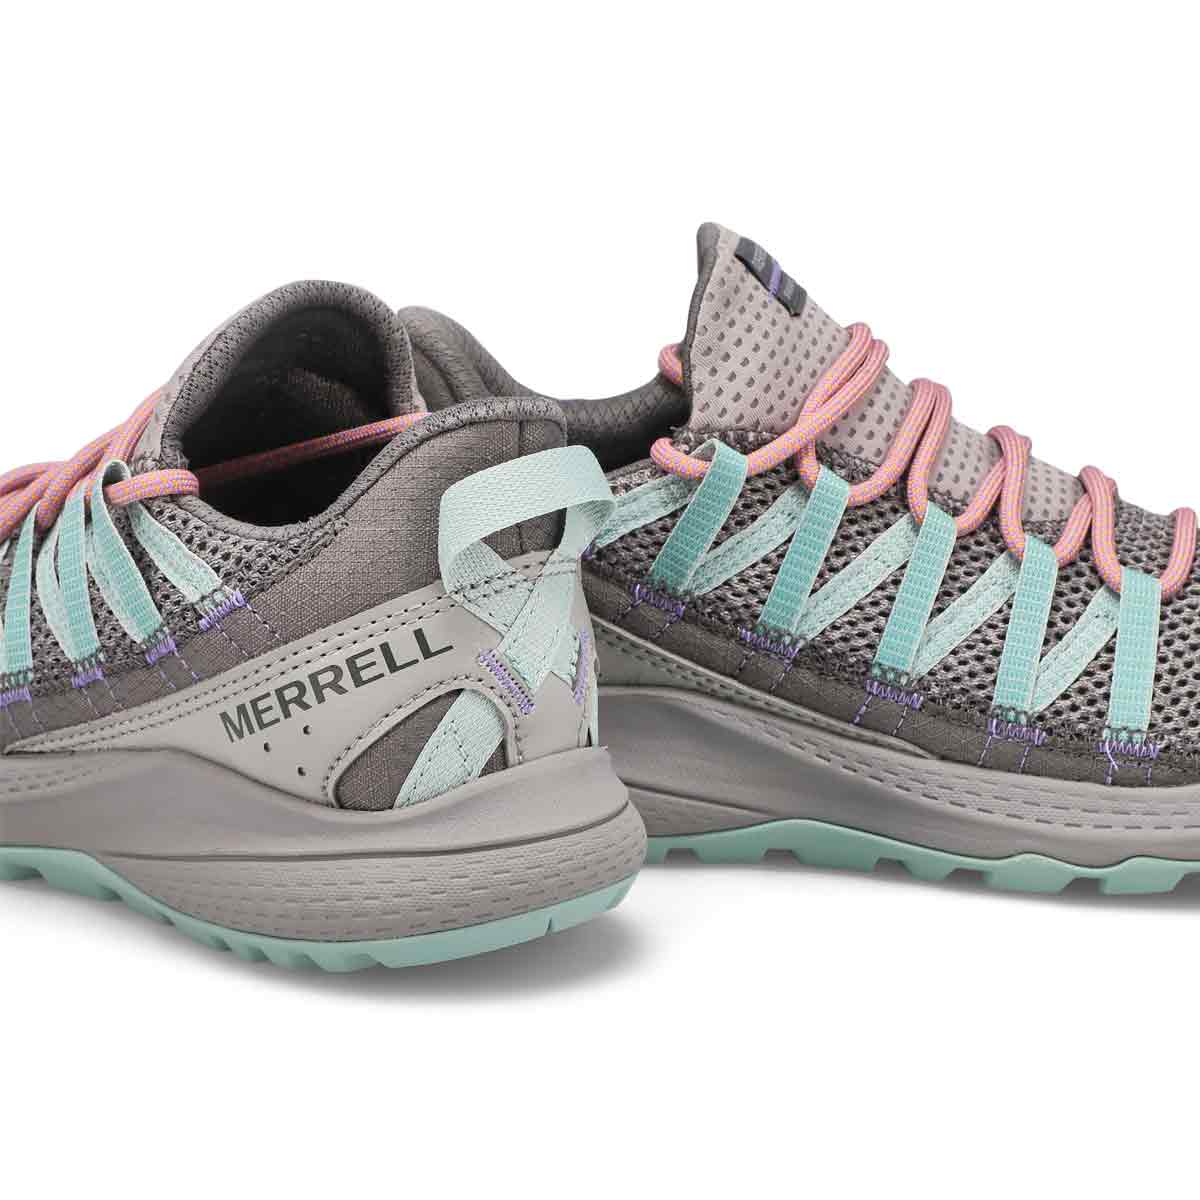 Merrell Womens Bravada Hiking Shoes - Sage – Sole To Soul Footwear